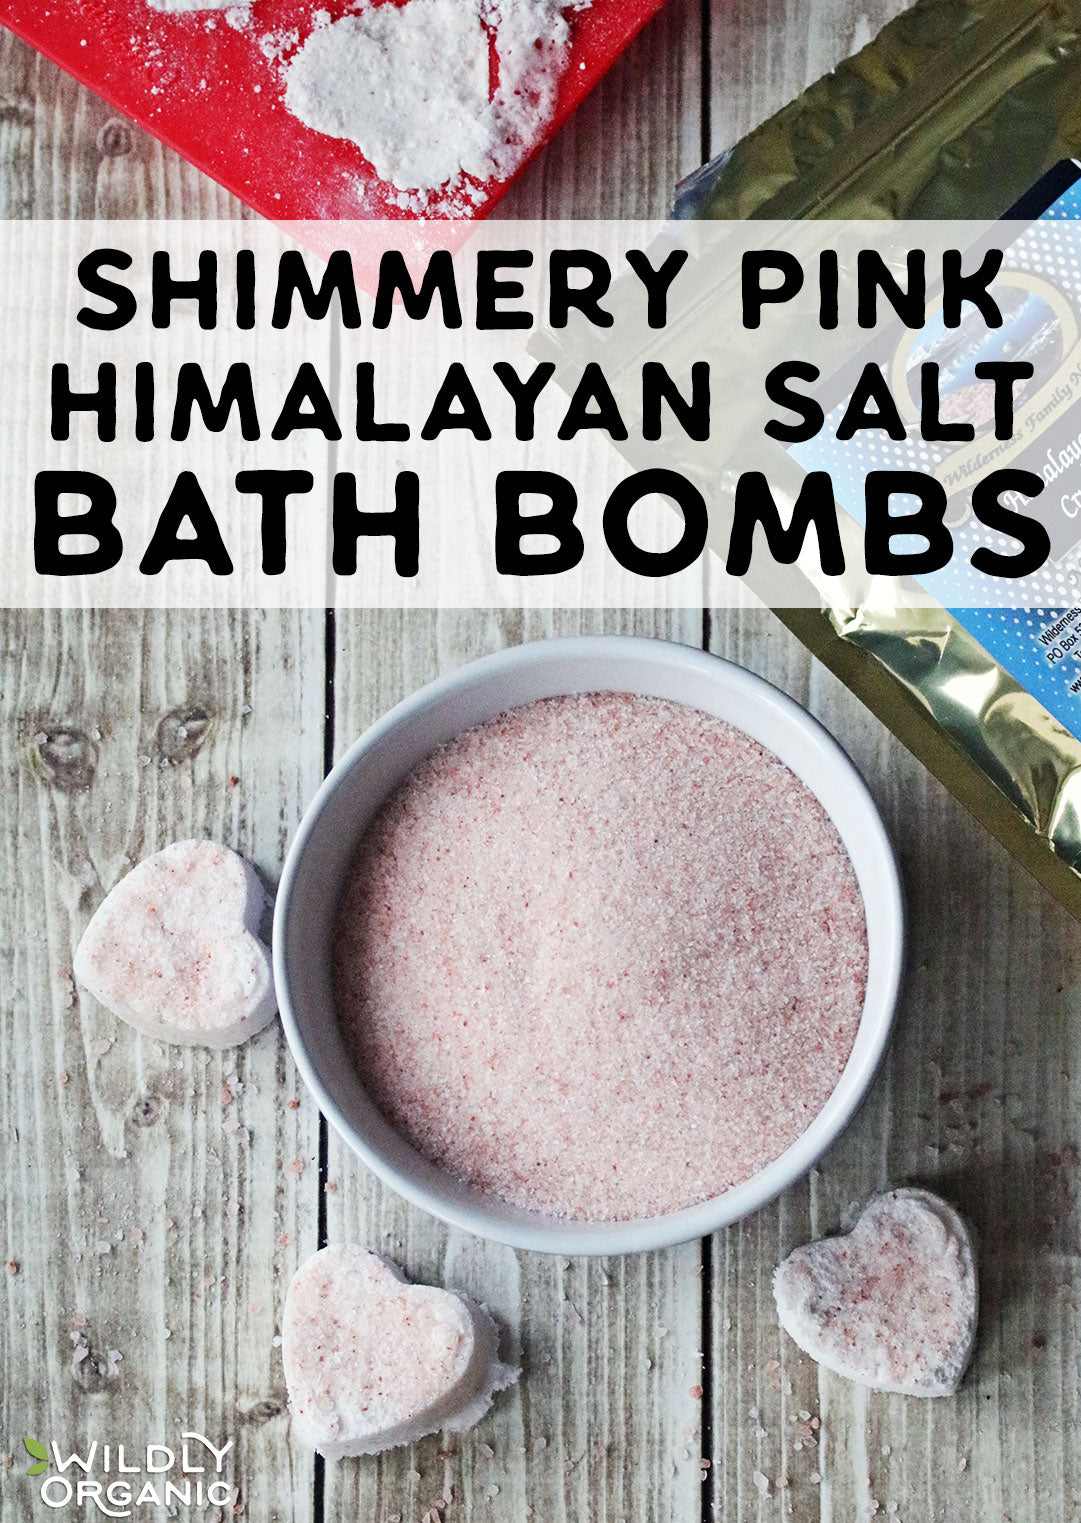 Photo of a bowl of salt with heart shaped bath bombs.